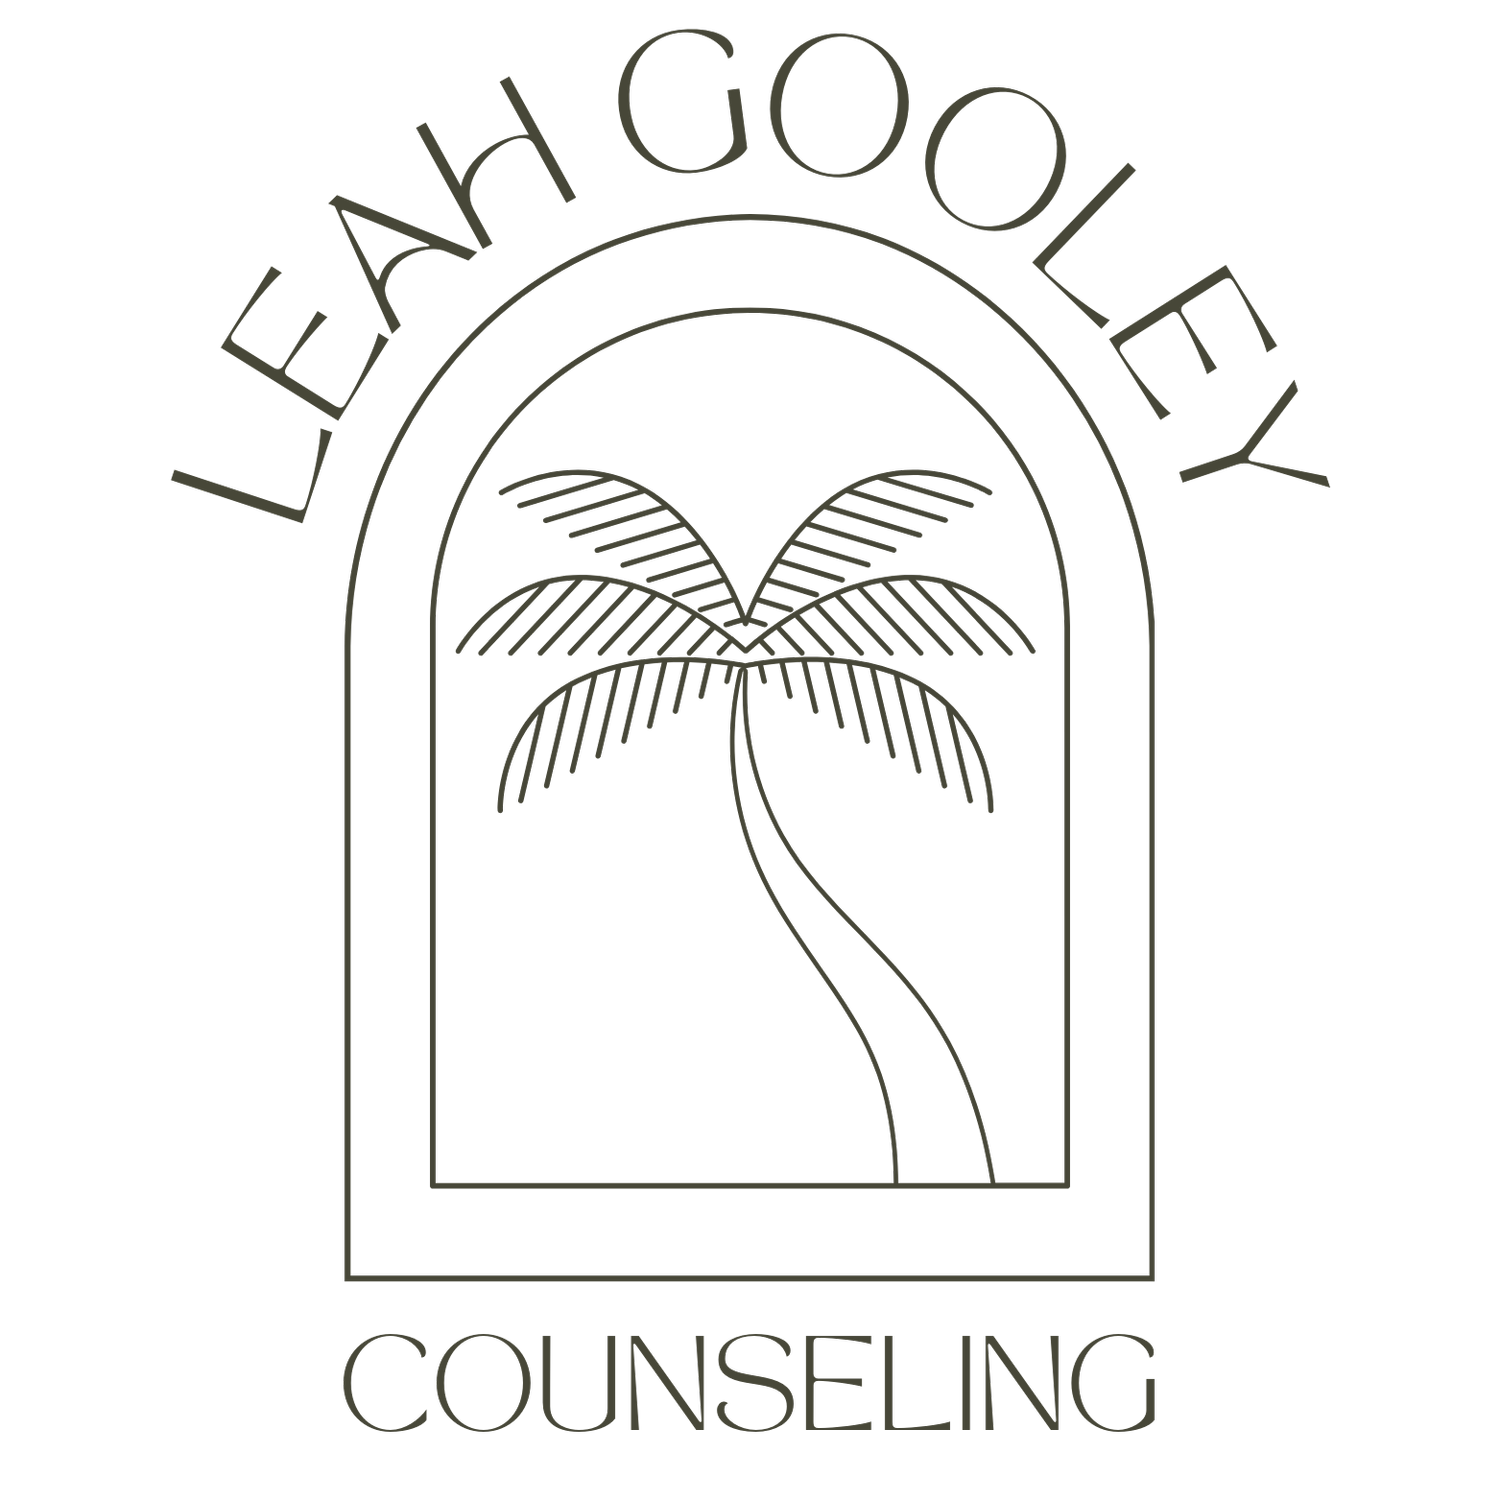 Leah Gooley Counseling